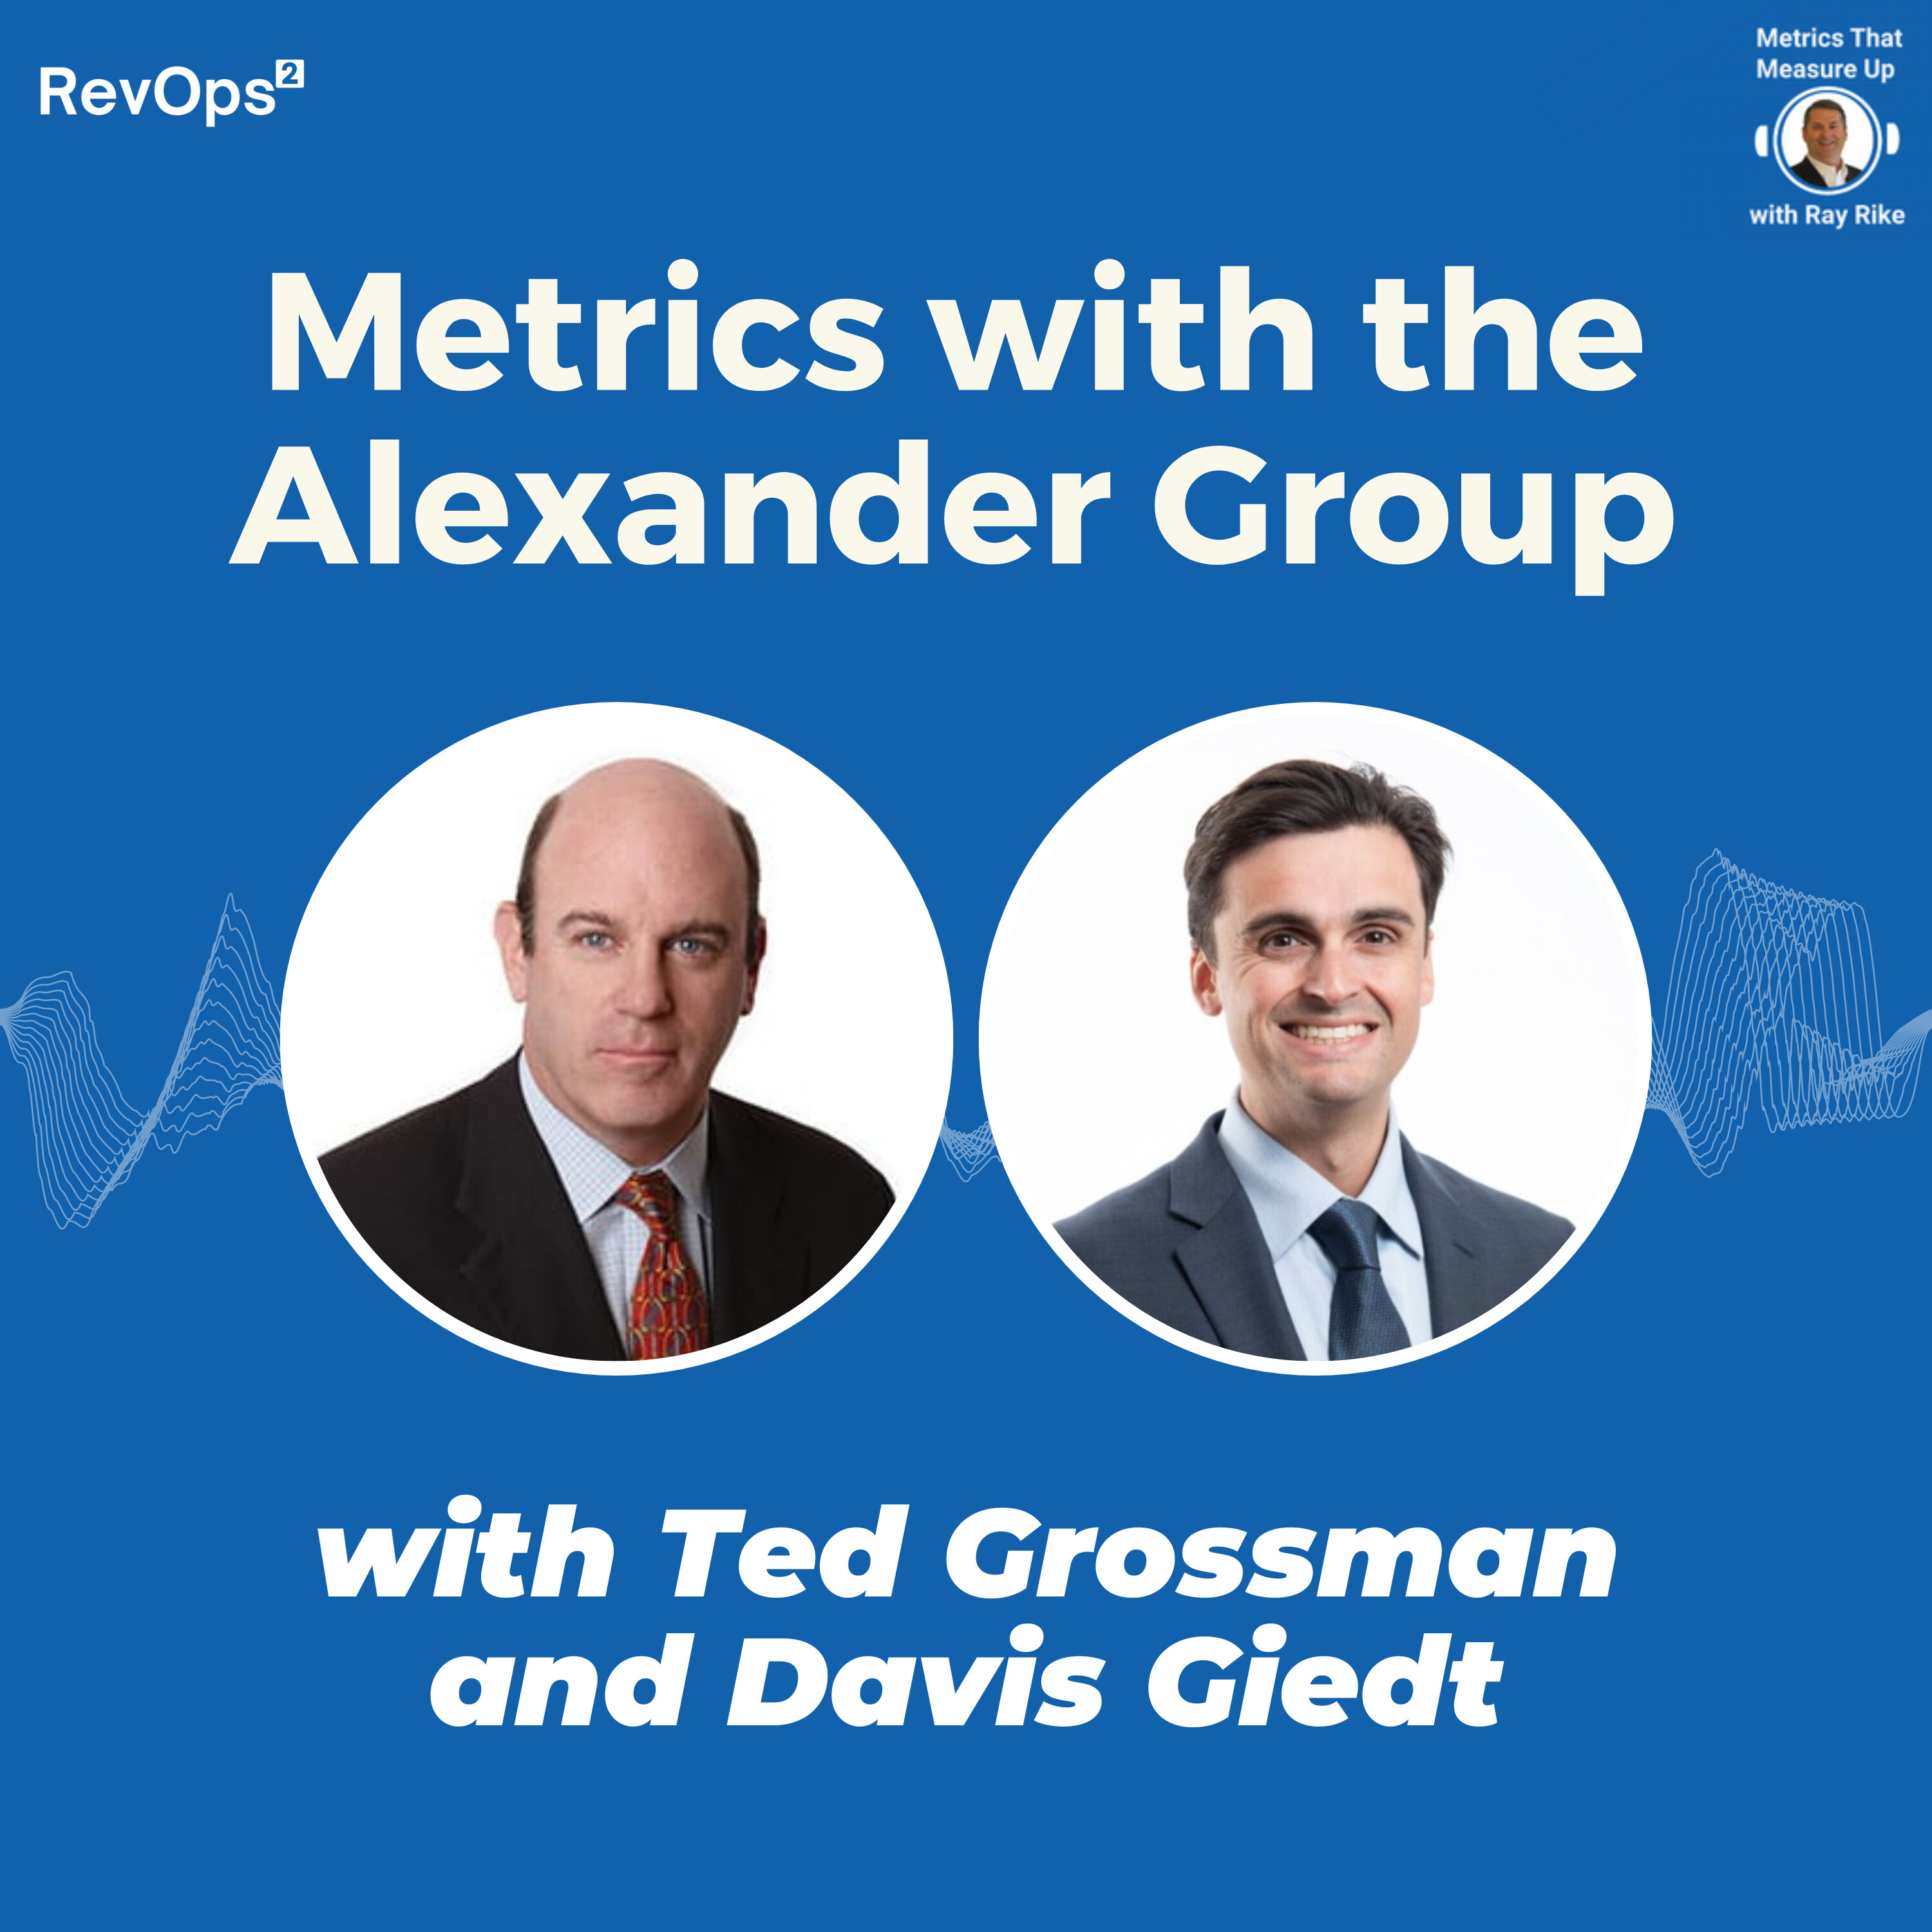 B2B SaaS Metrics and Prioities with the Alexander Group - Ted Grossman and Davis Giedt